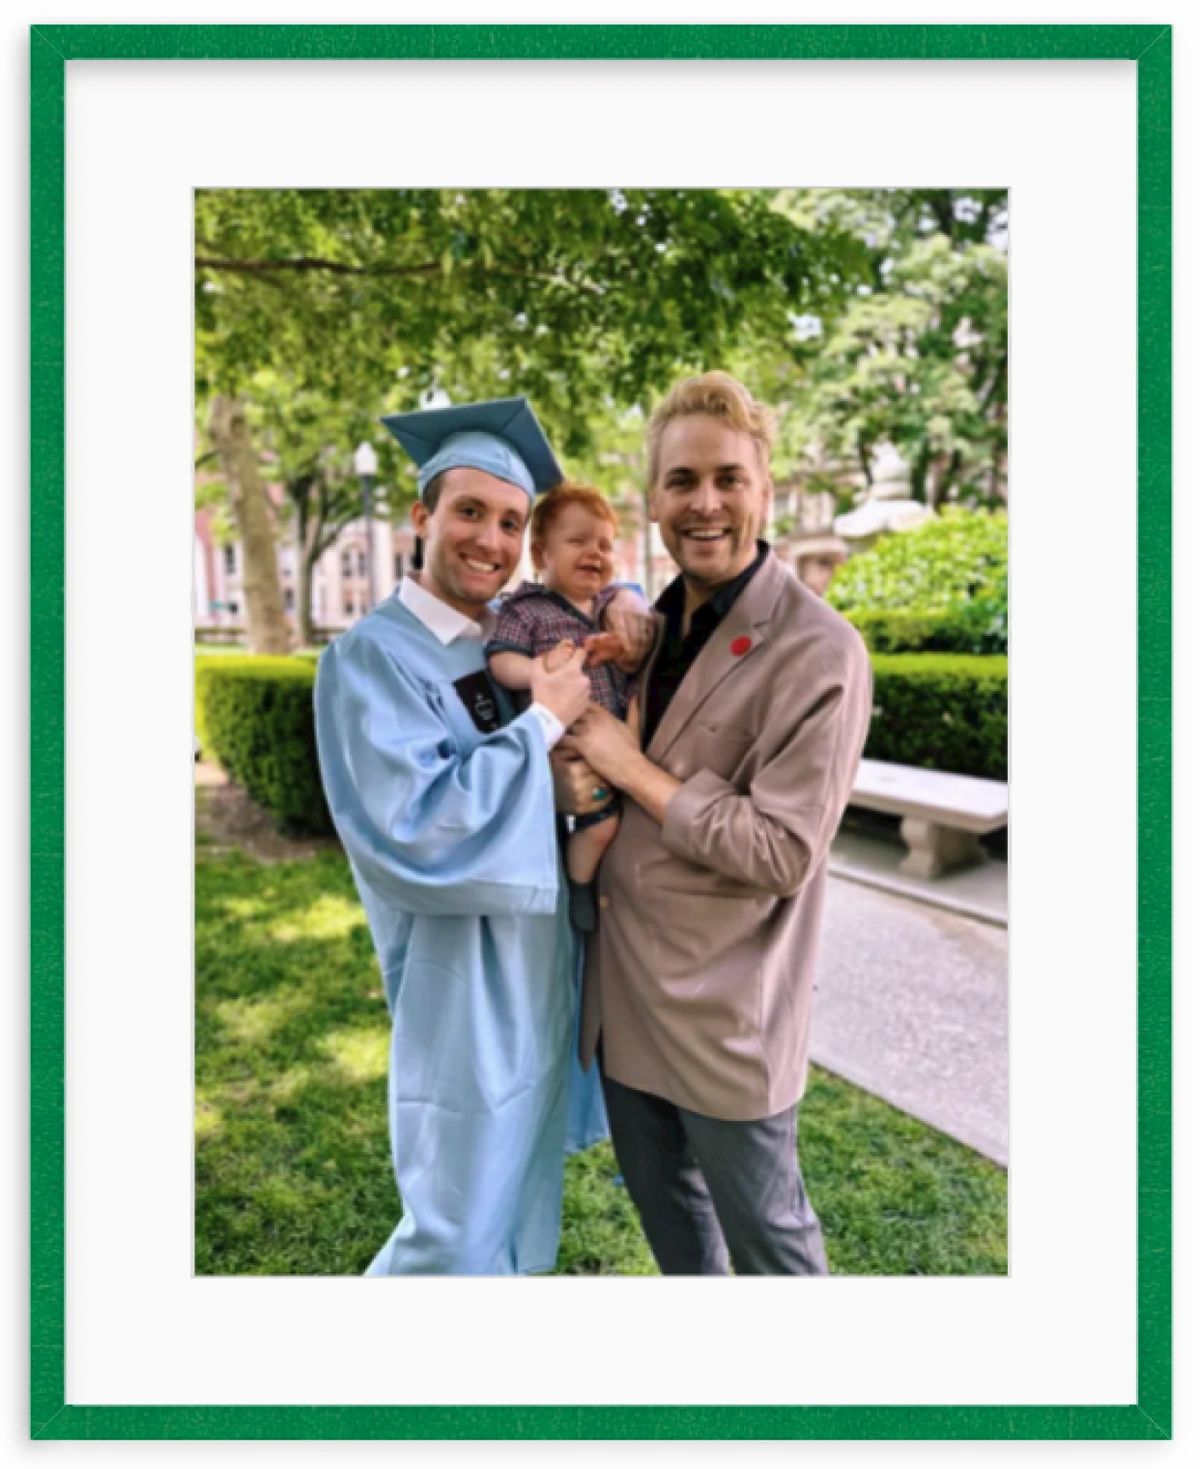 Graduation photo with dads and son